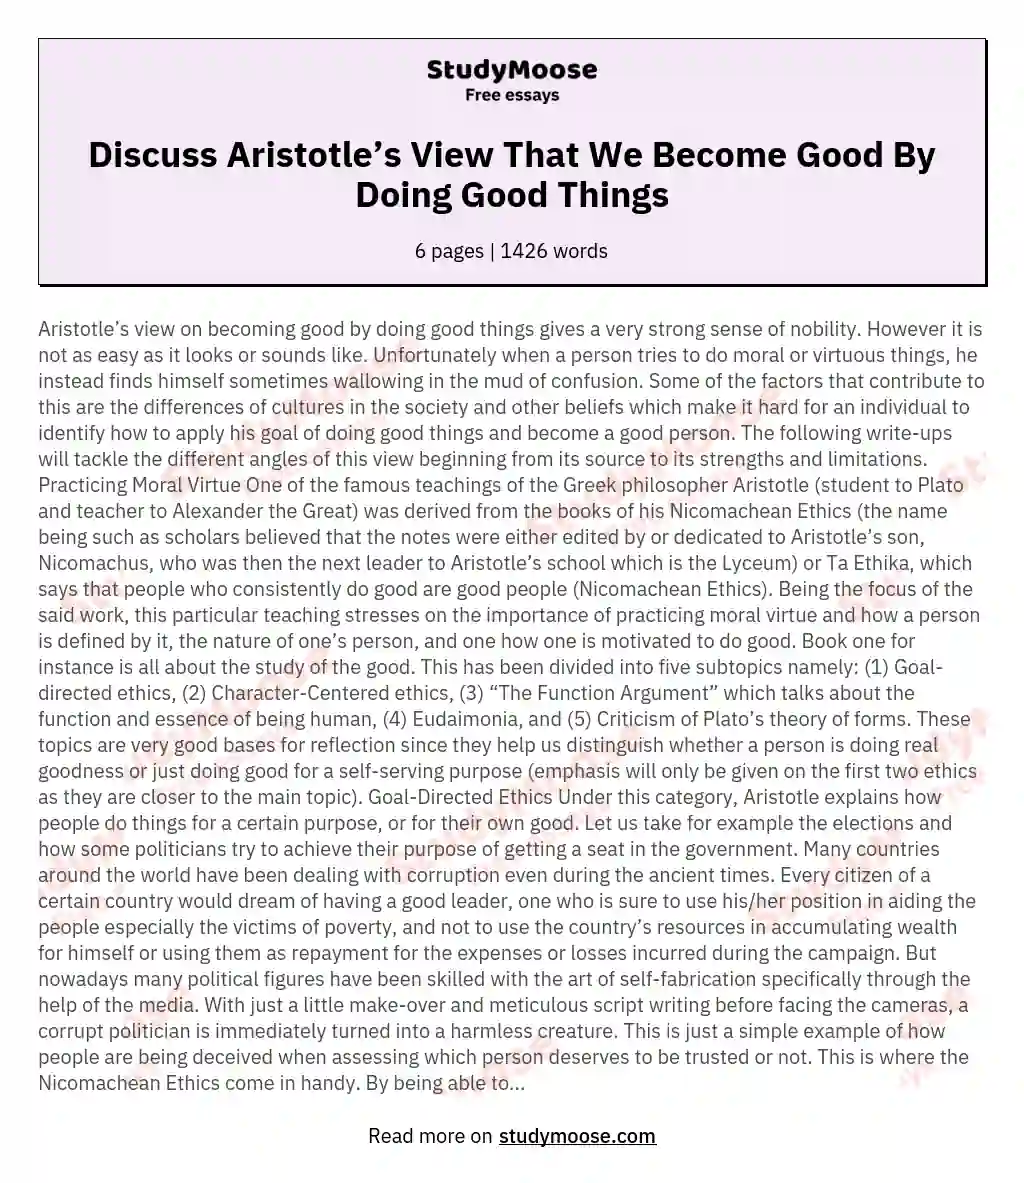 Discuss Aristotle’s View That We Become Good By Doing Good Things essay